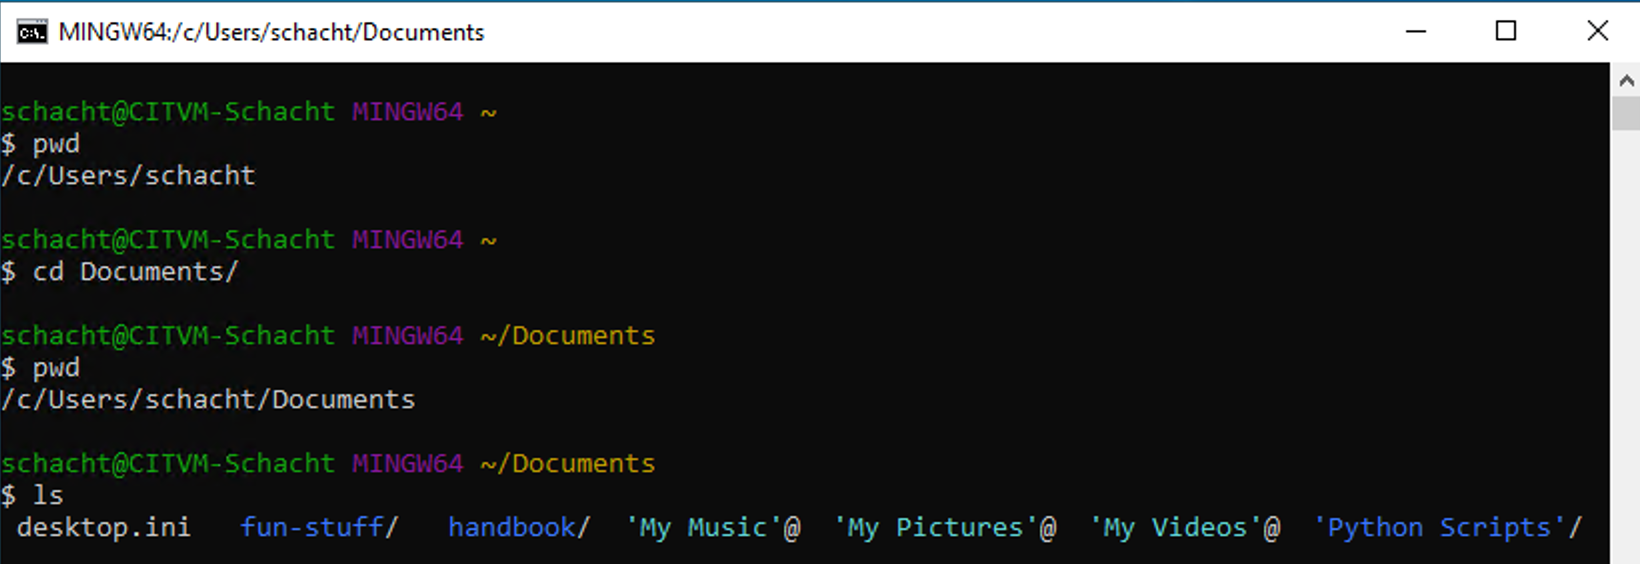 Terminal window in Git Bash showing contents of Documents folder